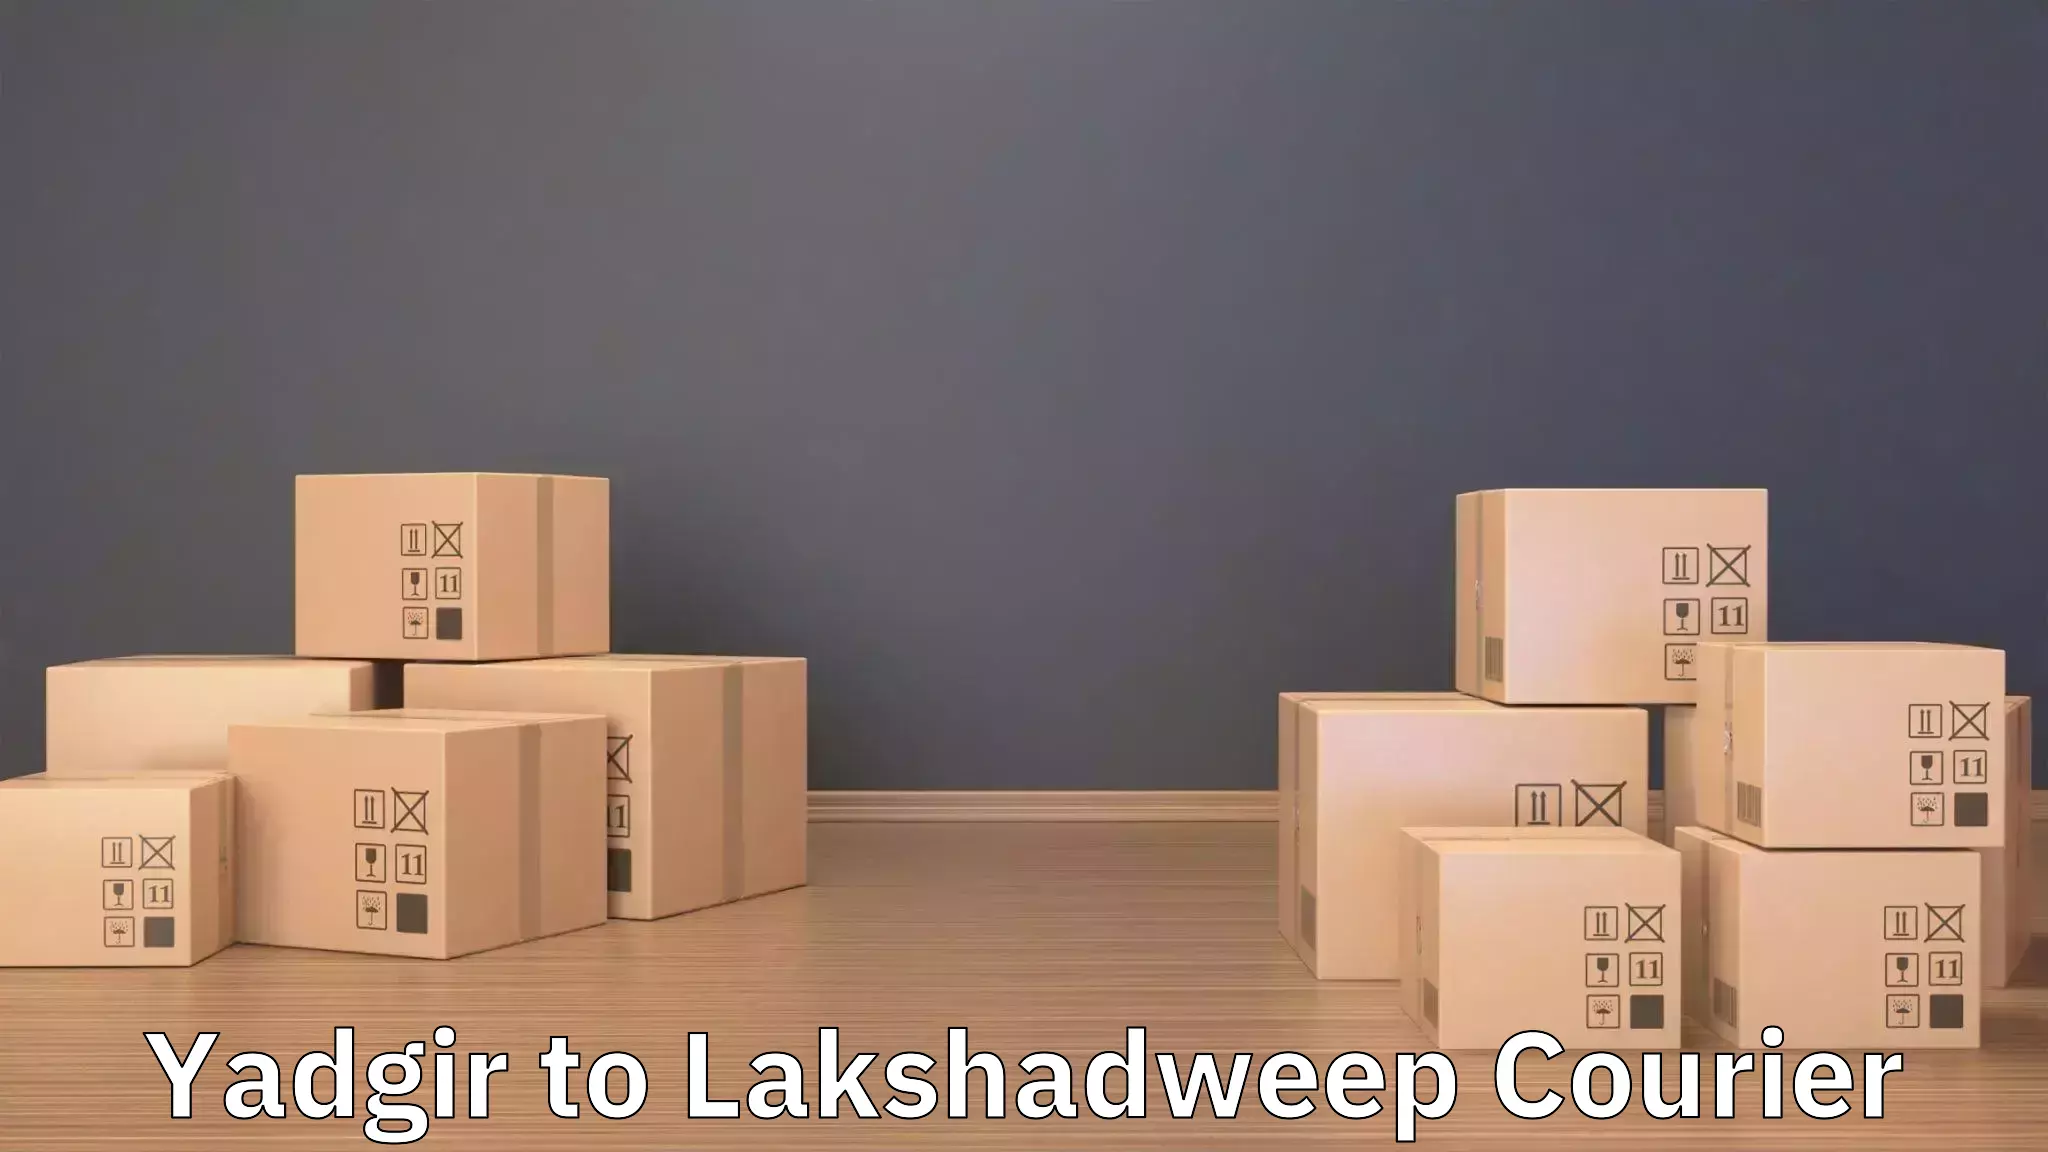 Home relocation experts Yadgir to Lakshadweep